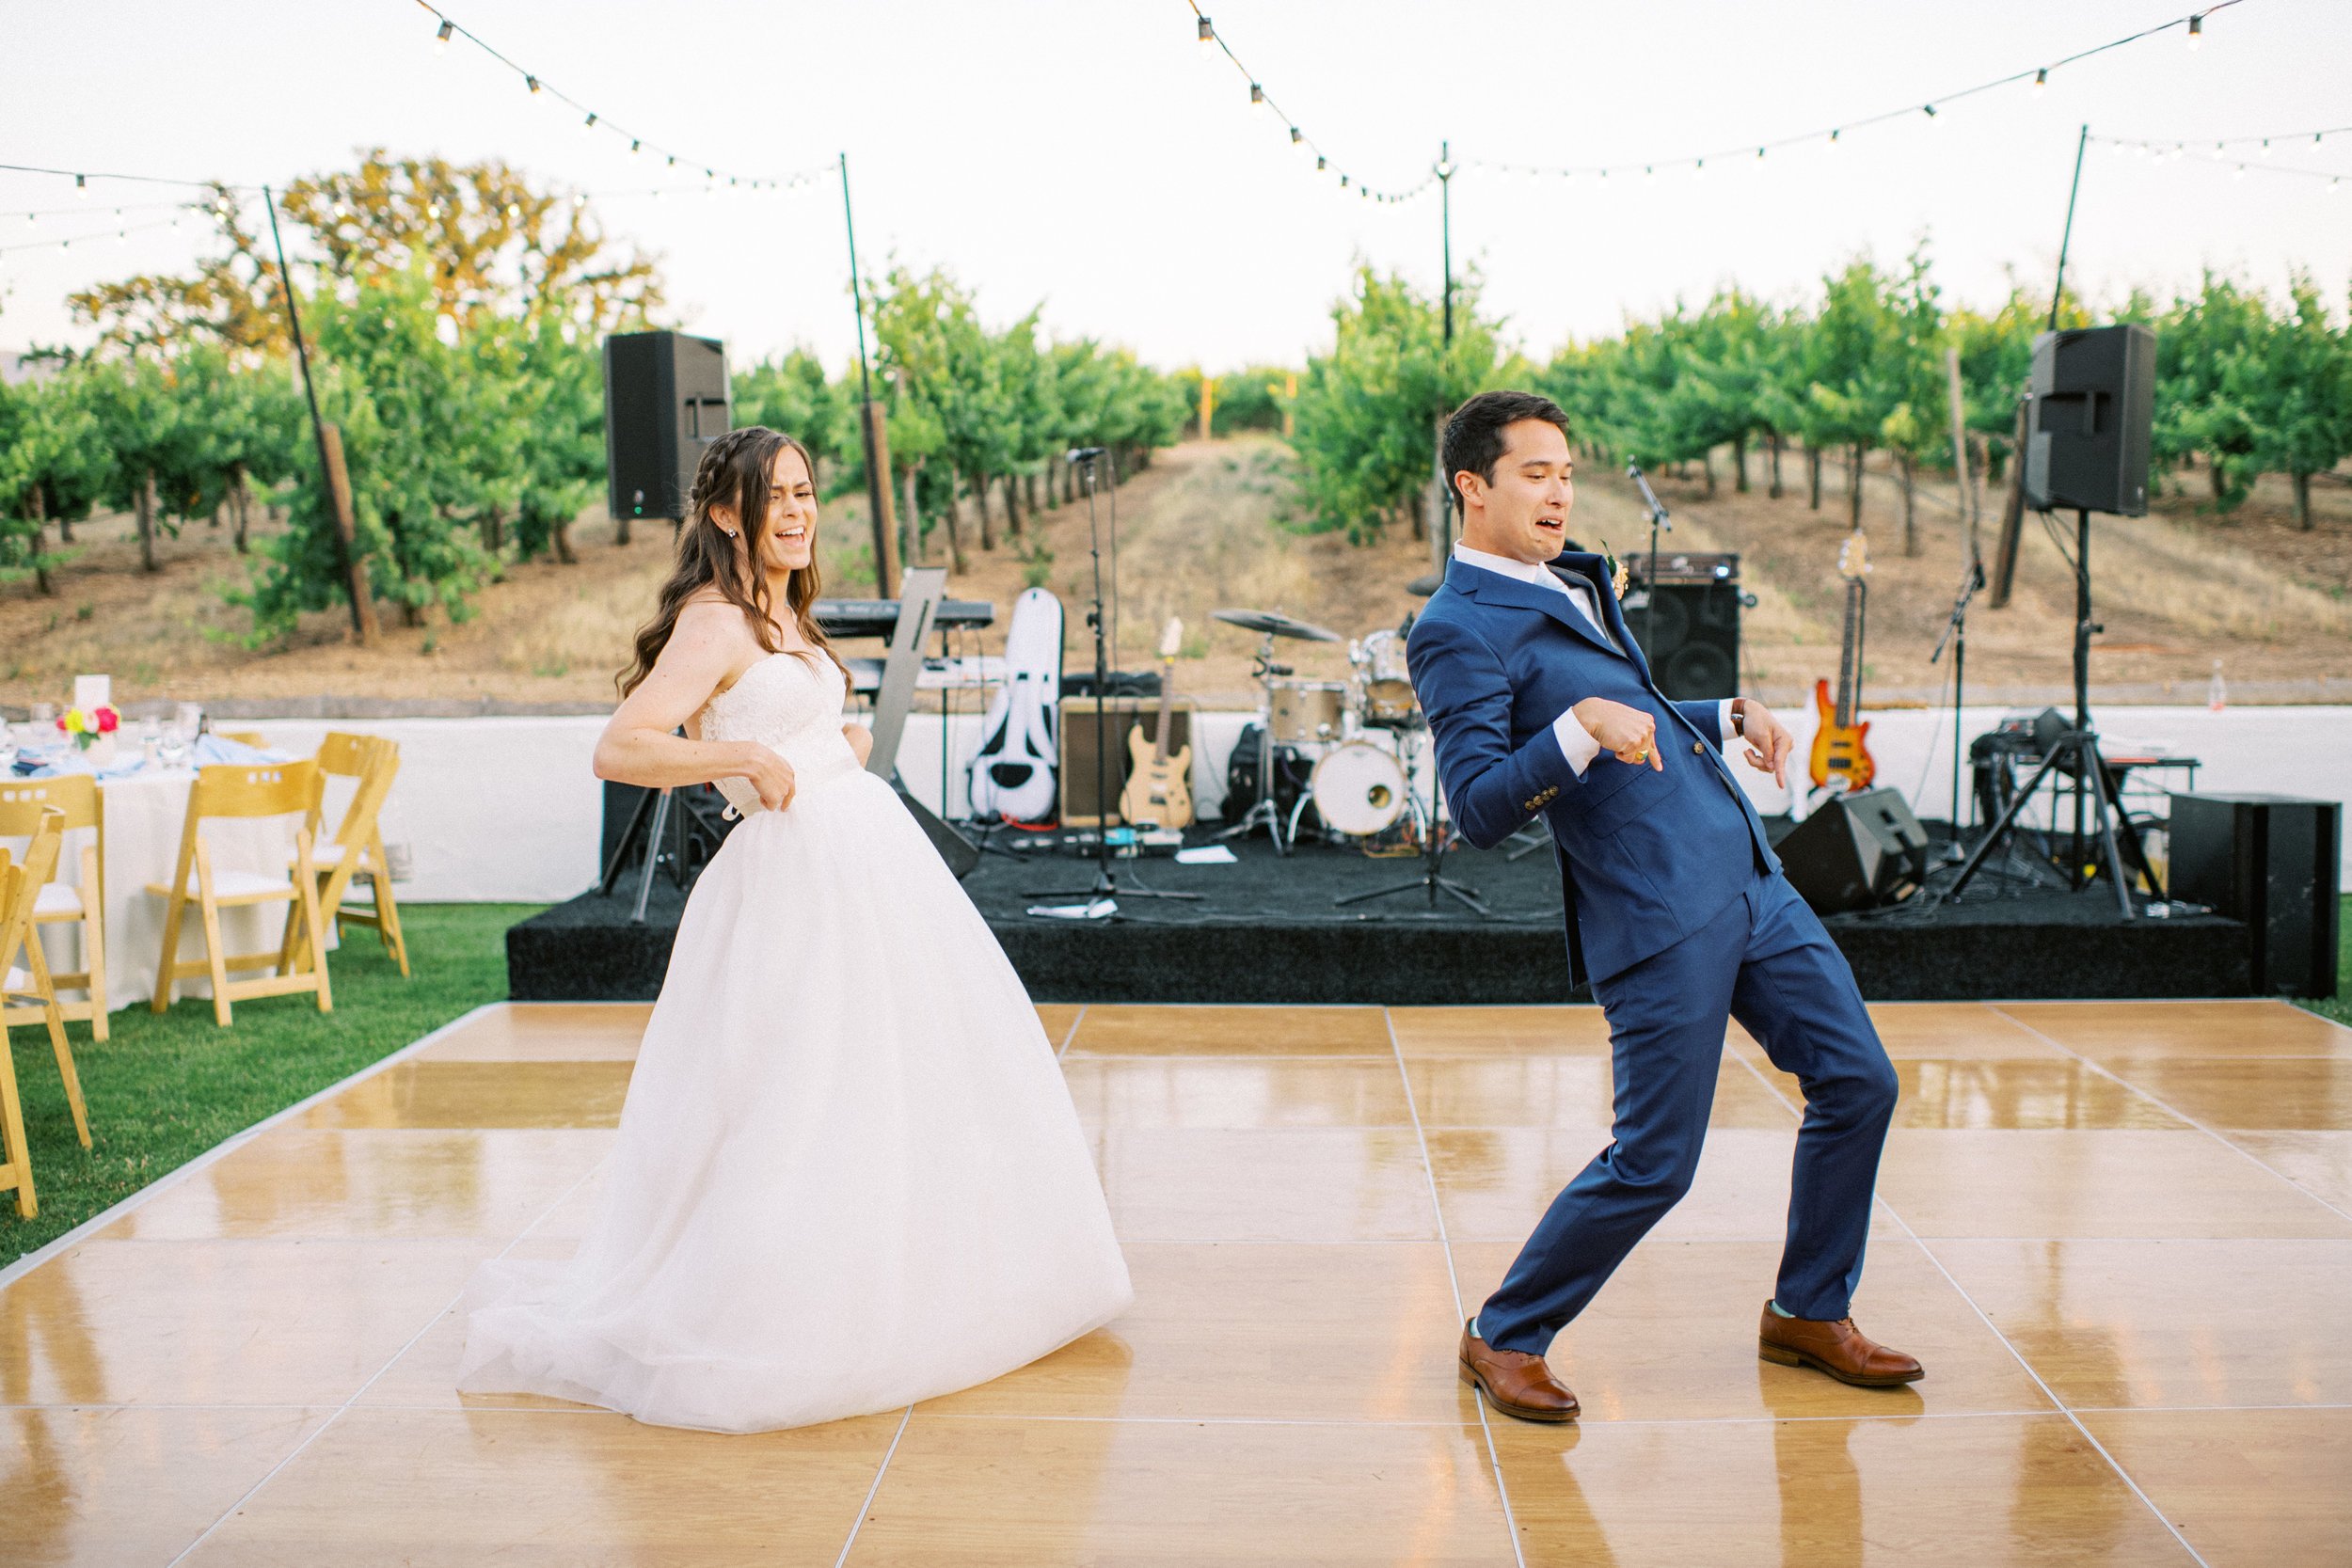 www.santabarbarawedding.com | Loveridge Photography | Gainey Vineyard | Amber Alyse Events | Besame Florals | Lucky Devils Band | The Bride and Groom’s Choreographed Dance